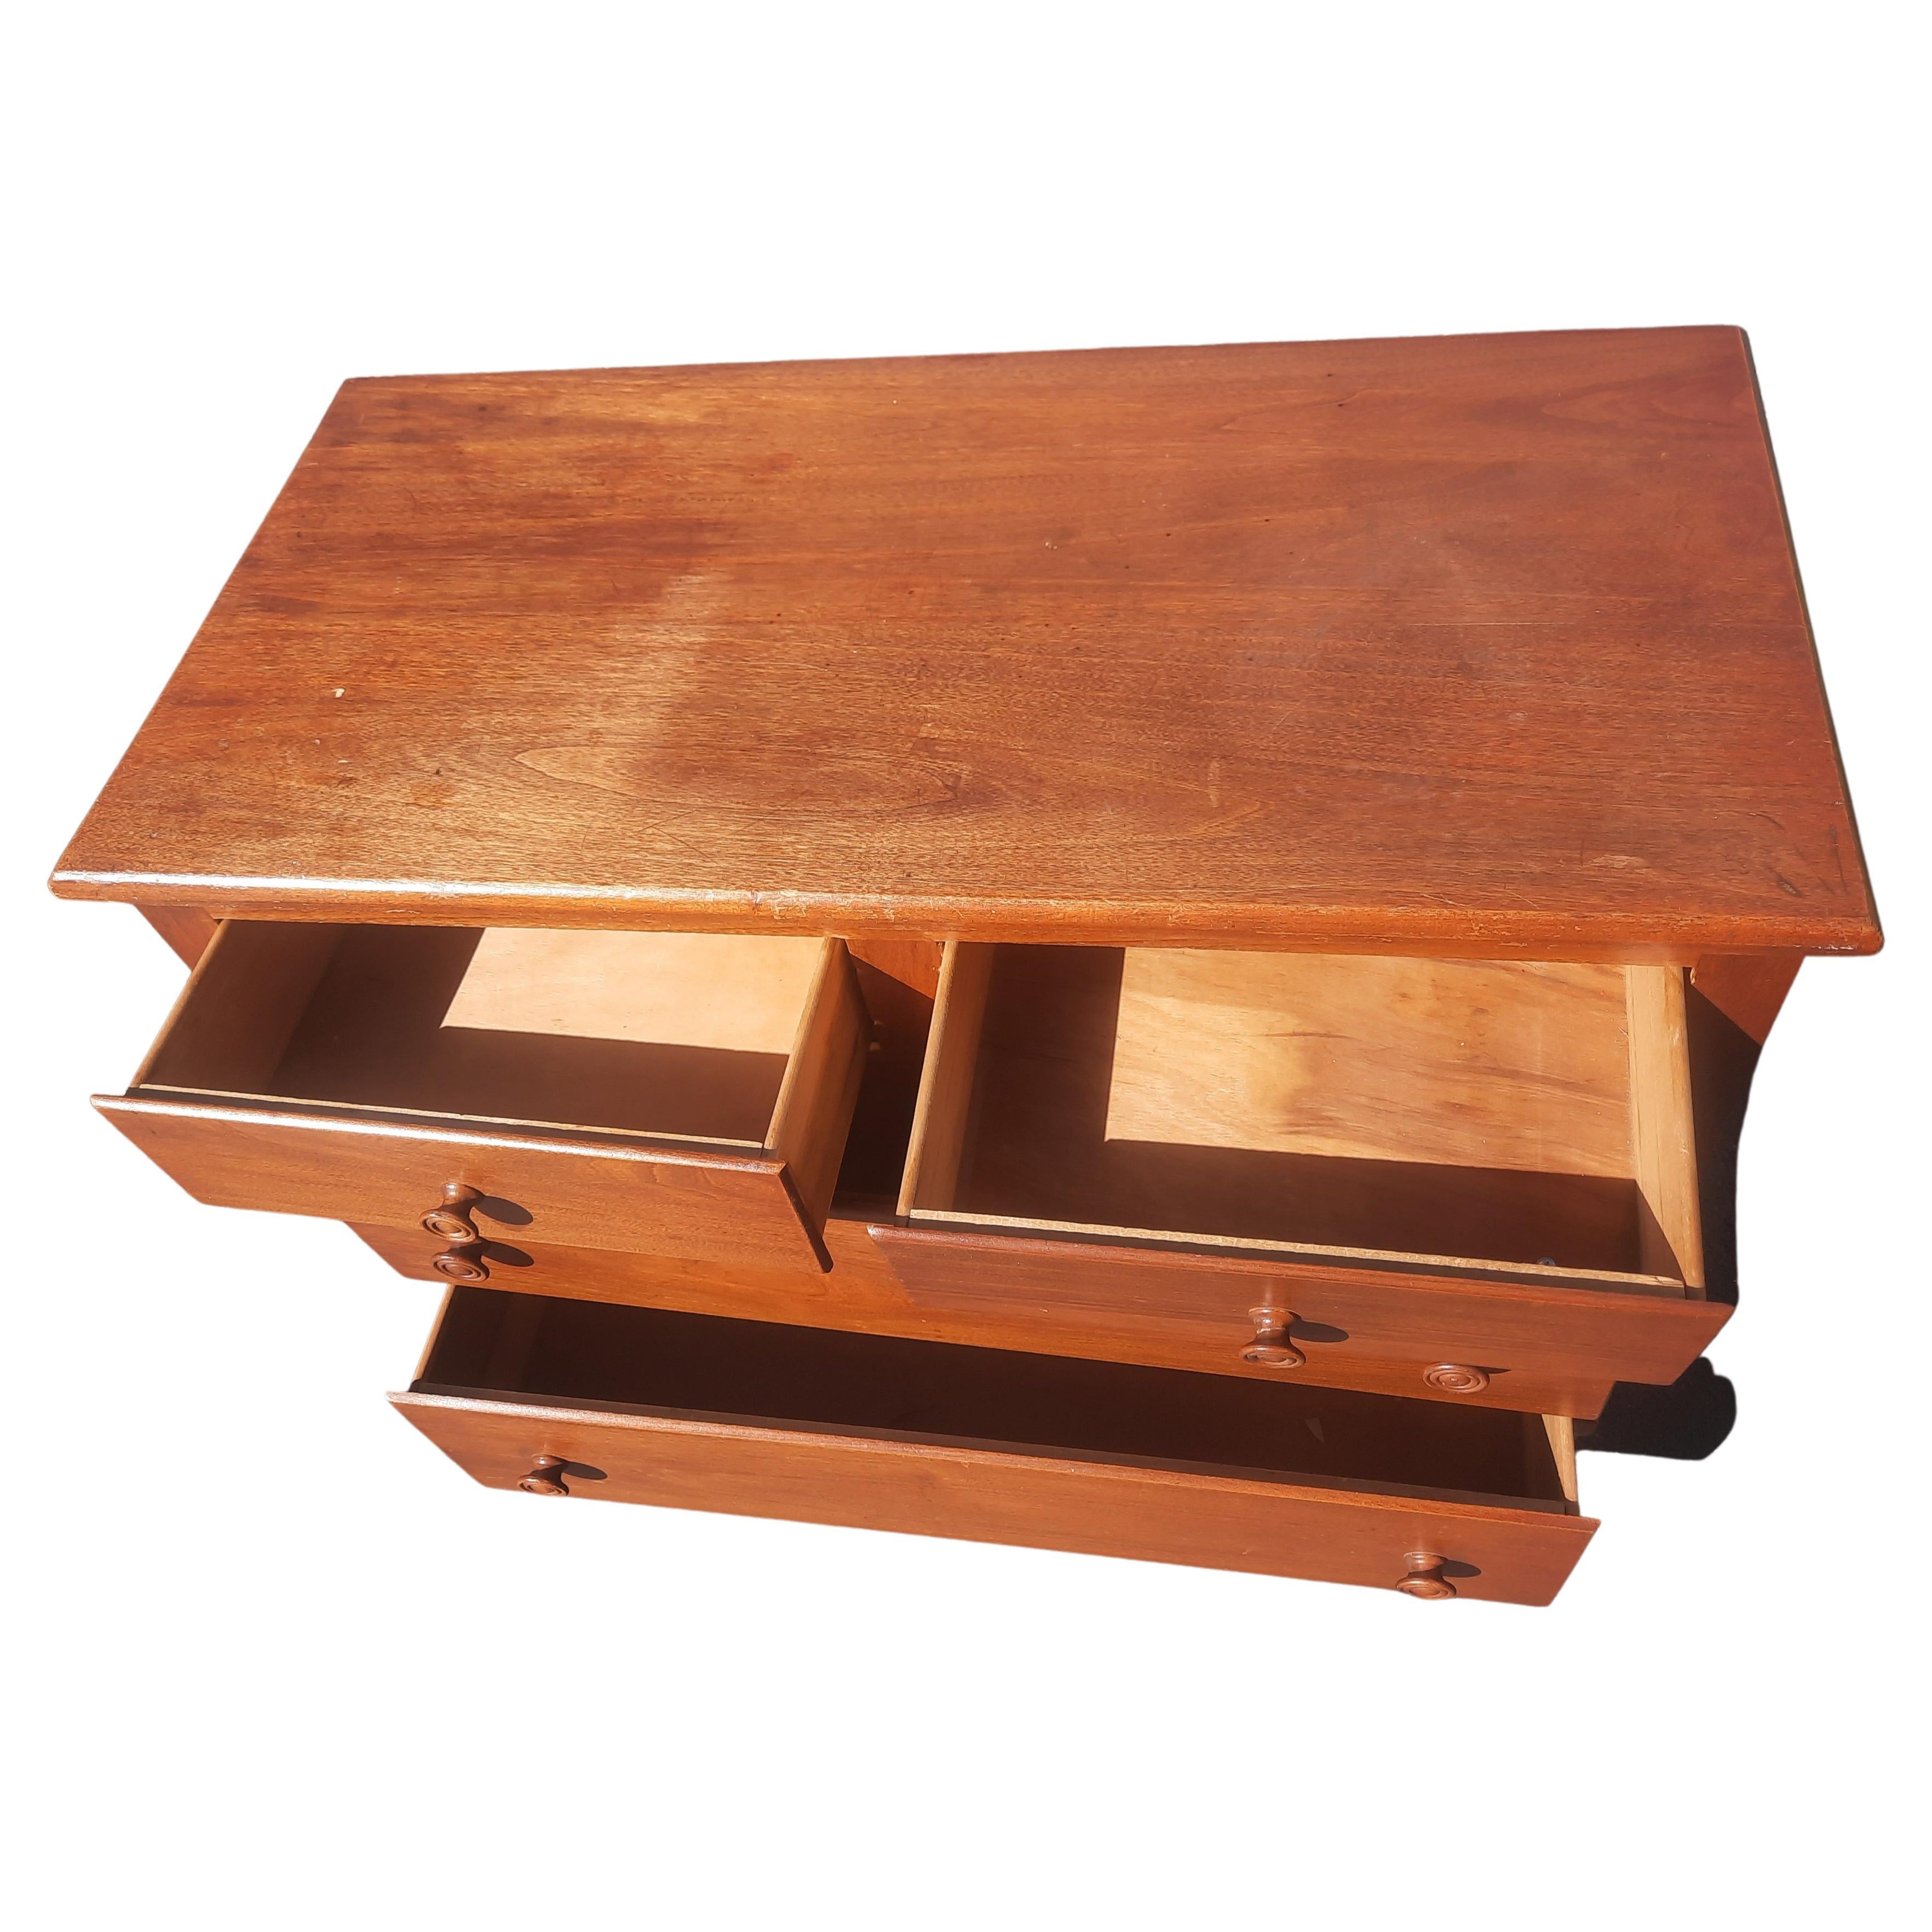 American Antique Oak Chest of Drawers with Original Wood Drawer Knobs For Sale